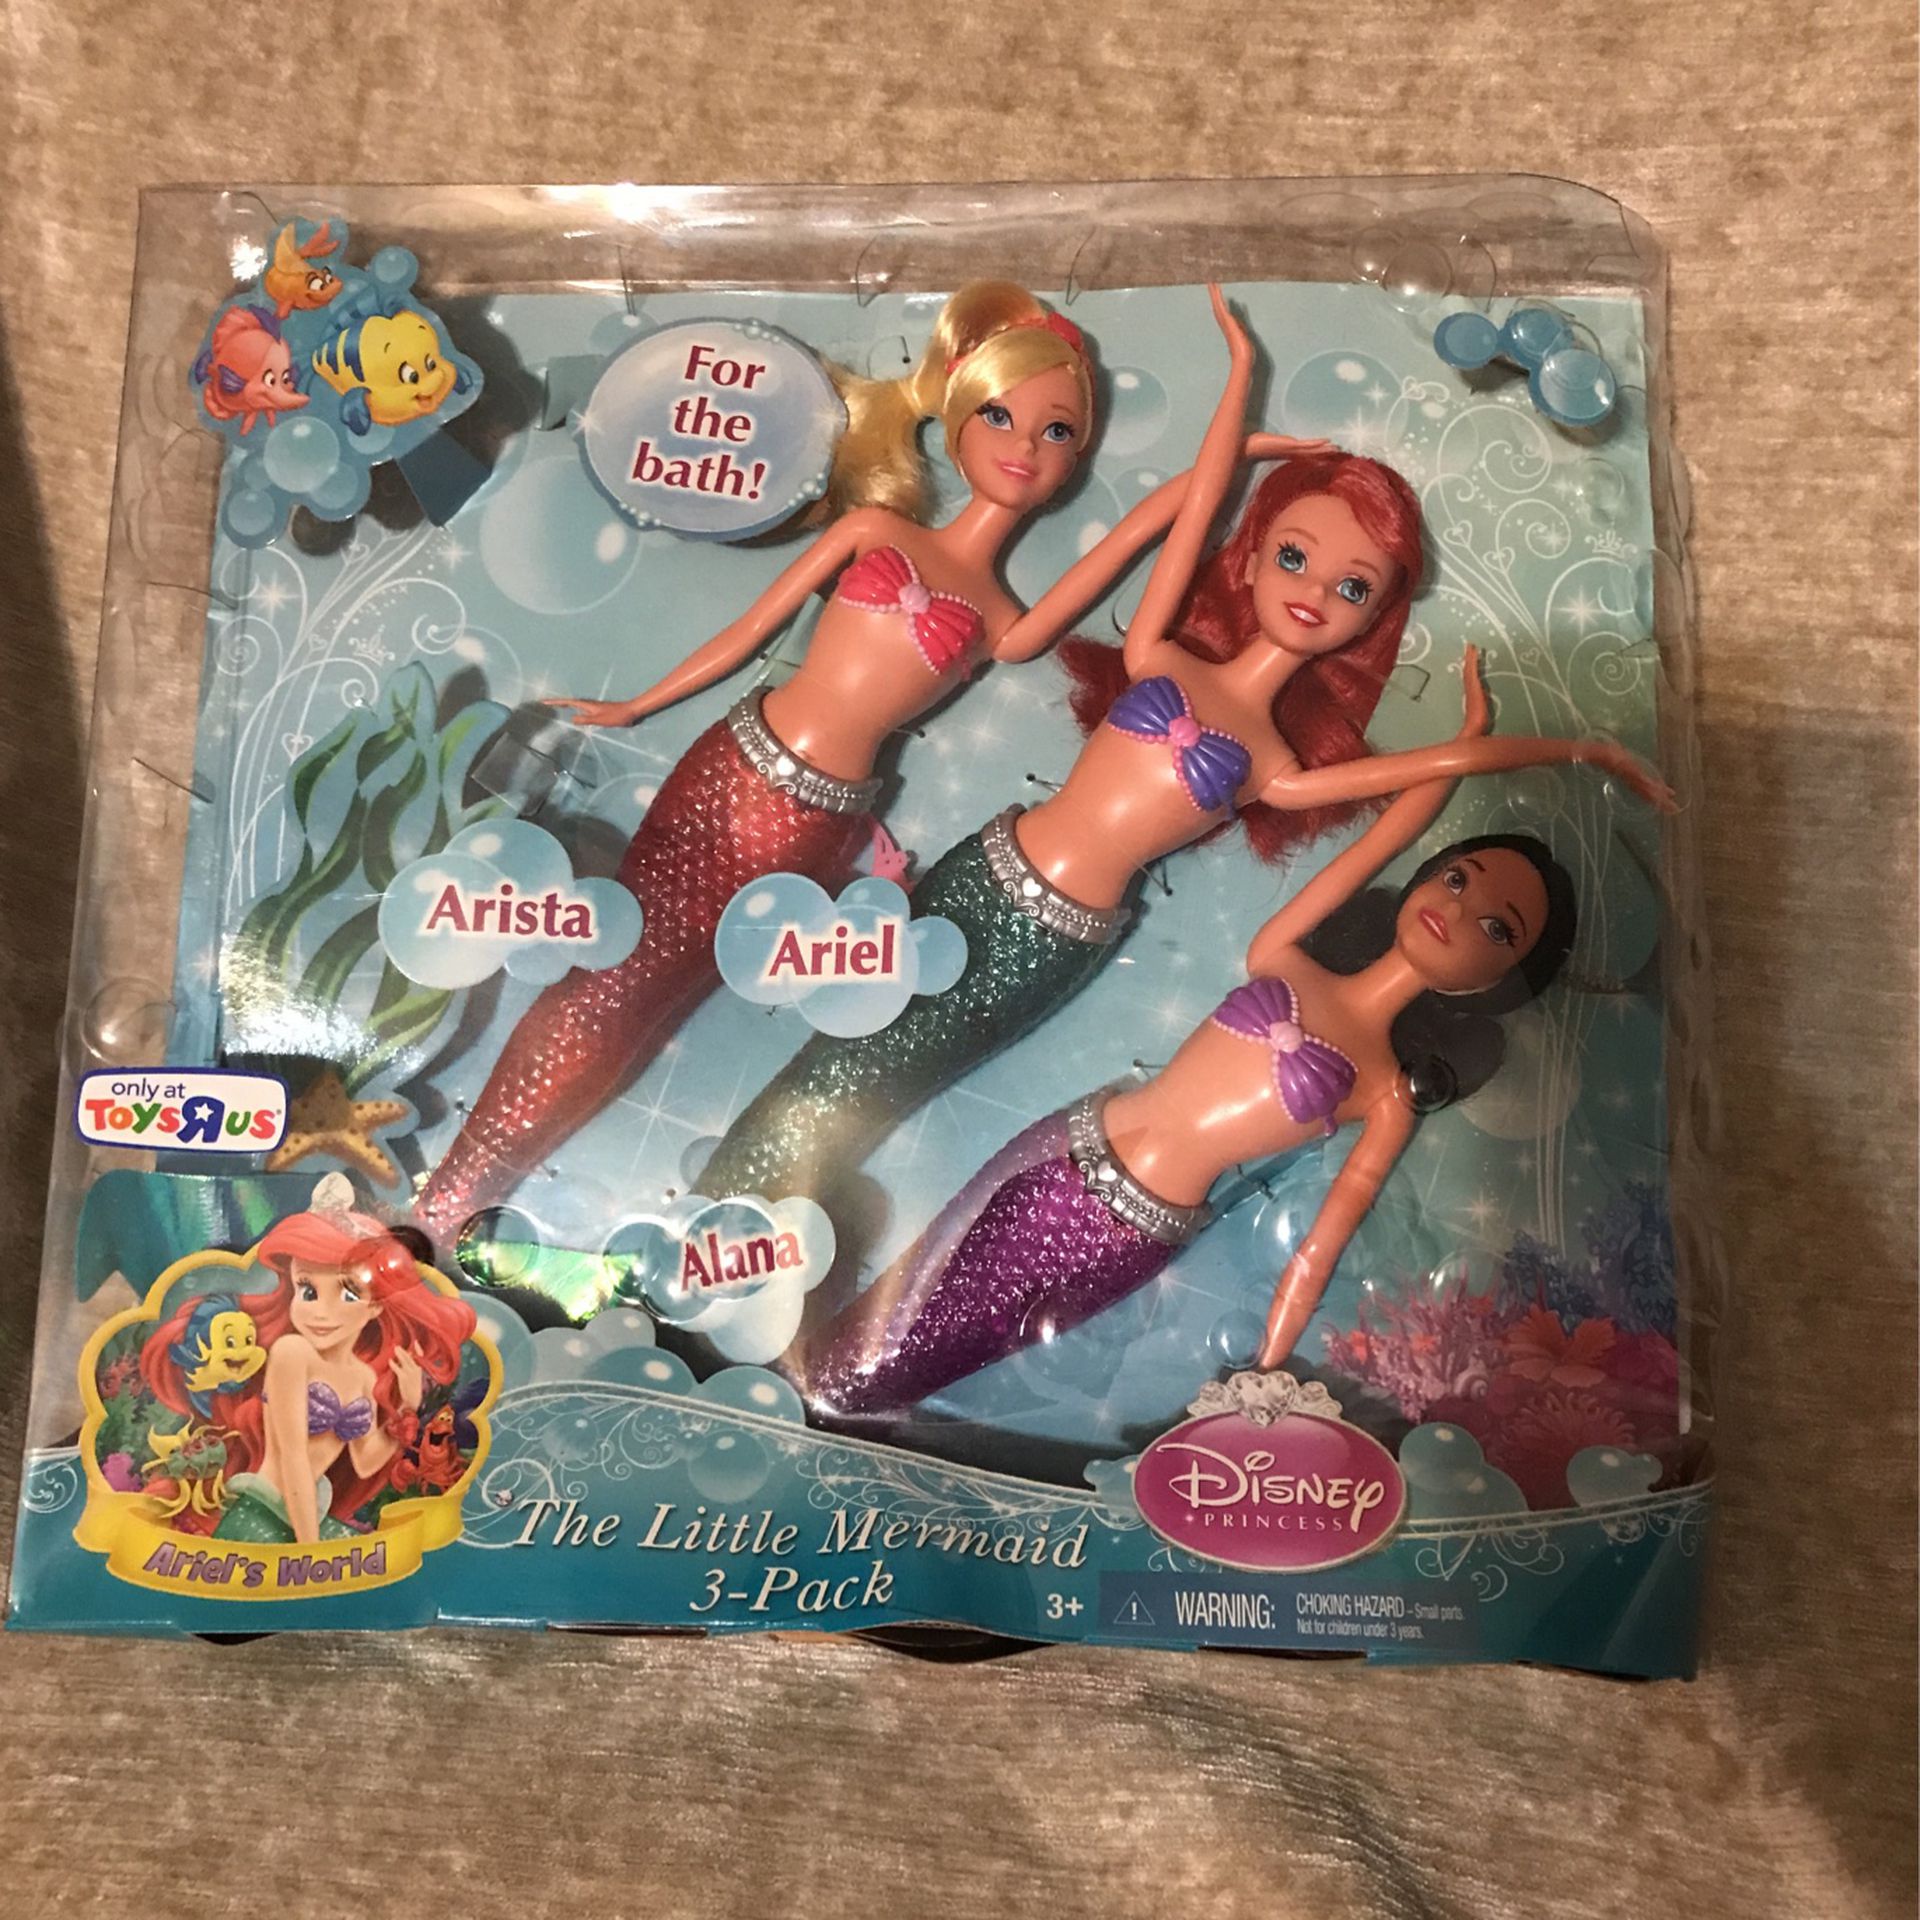 Rare hard To Find Toys R Us The Little Mermaid 3 Pack